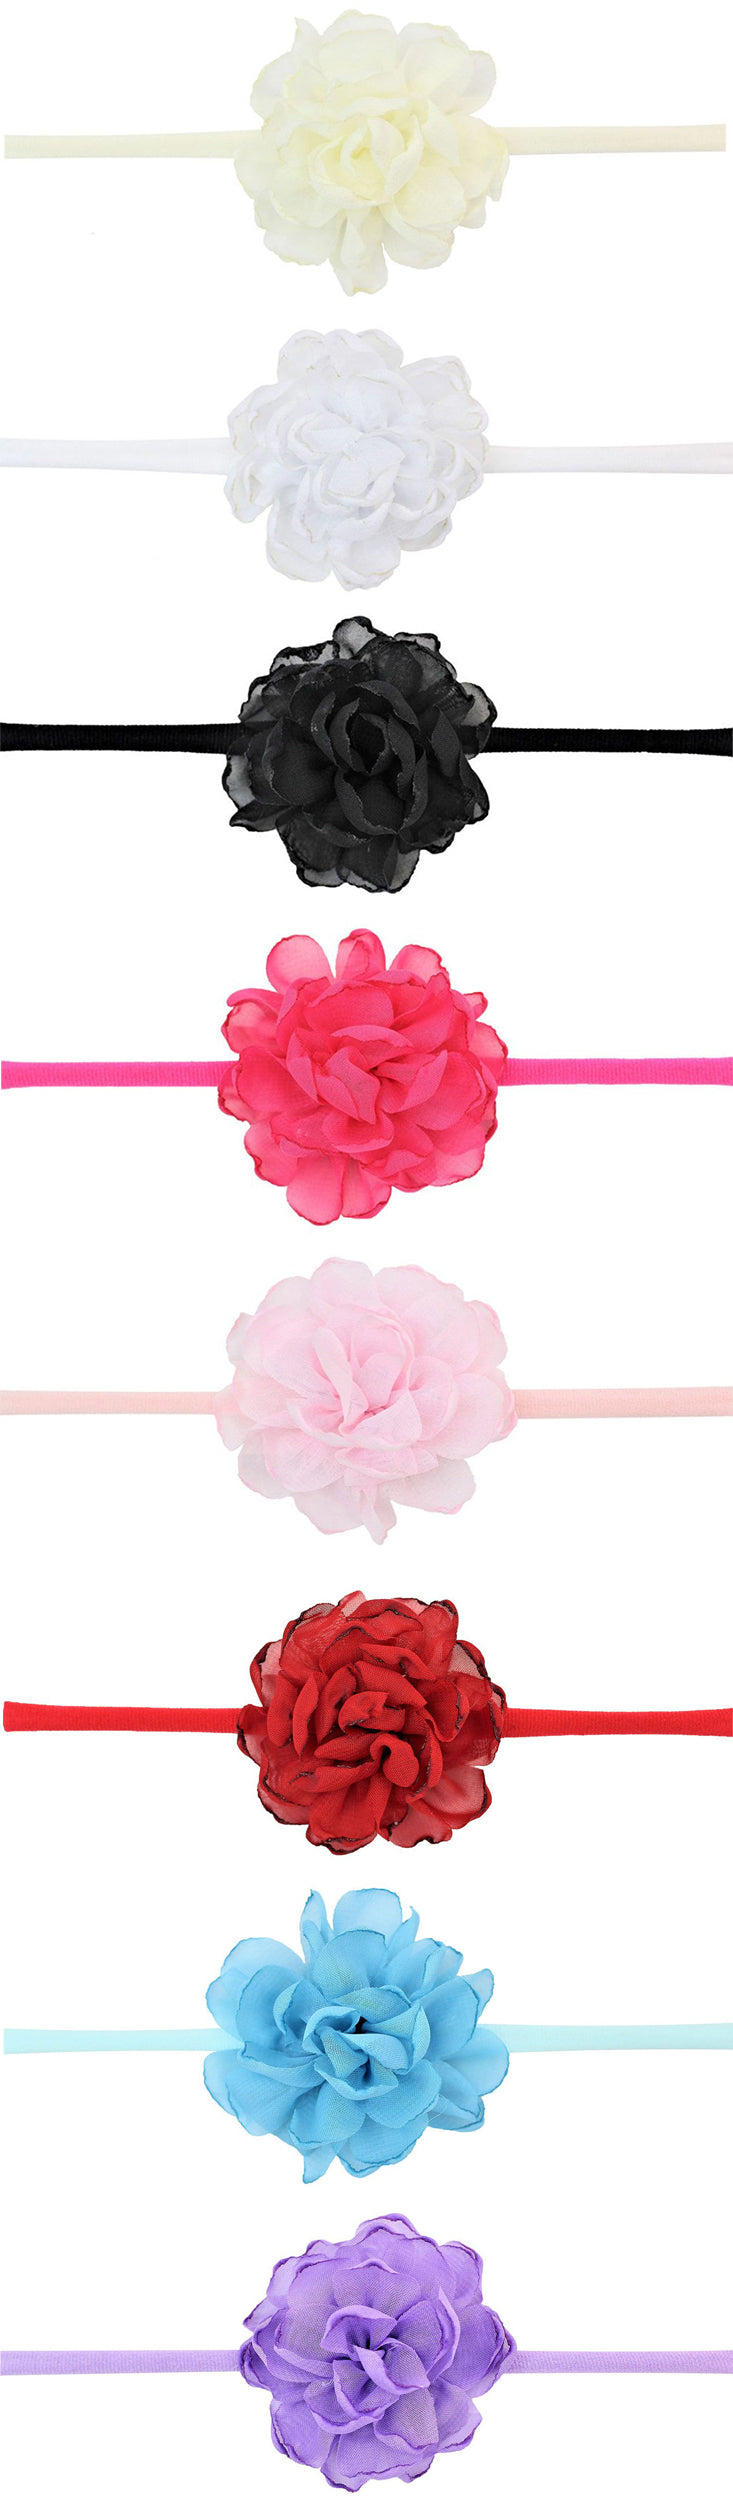  Soft stretchy band with matching tulle flower headband in a variety of colors